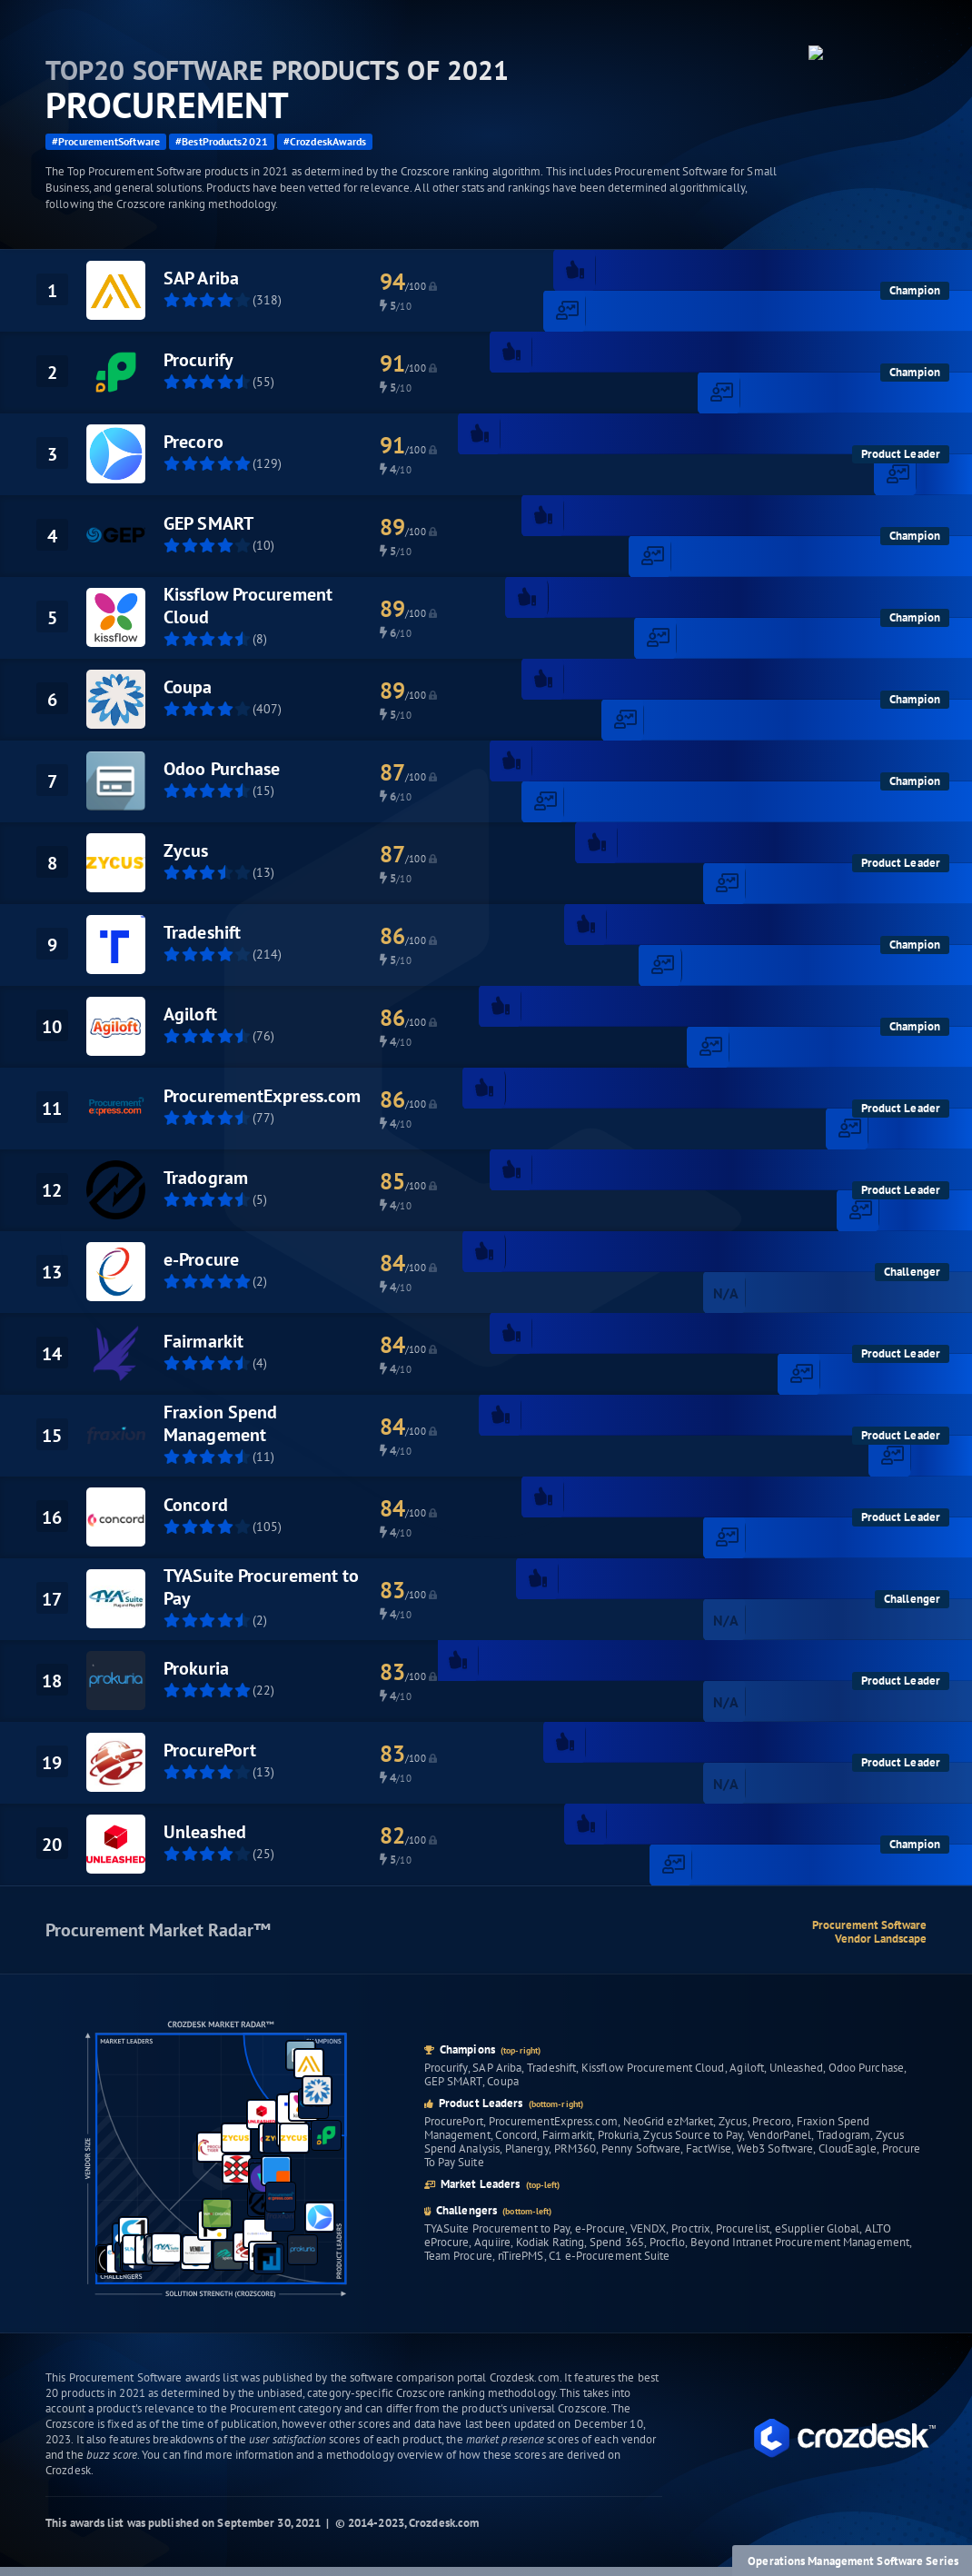 Top 20 Procurement Software of 2021 Infographic